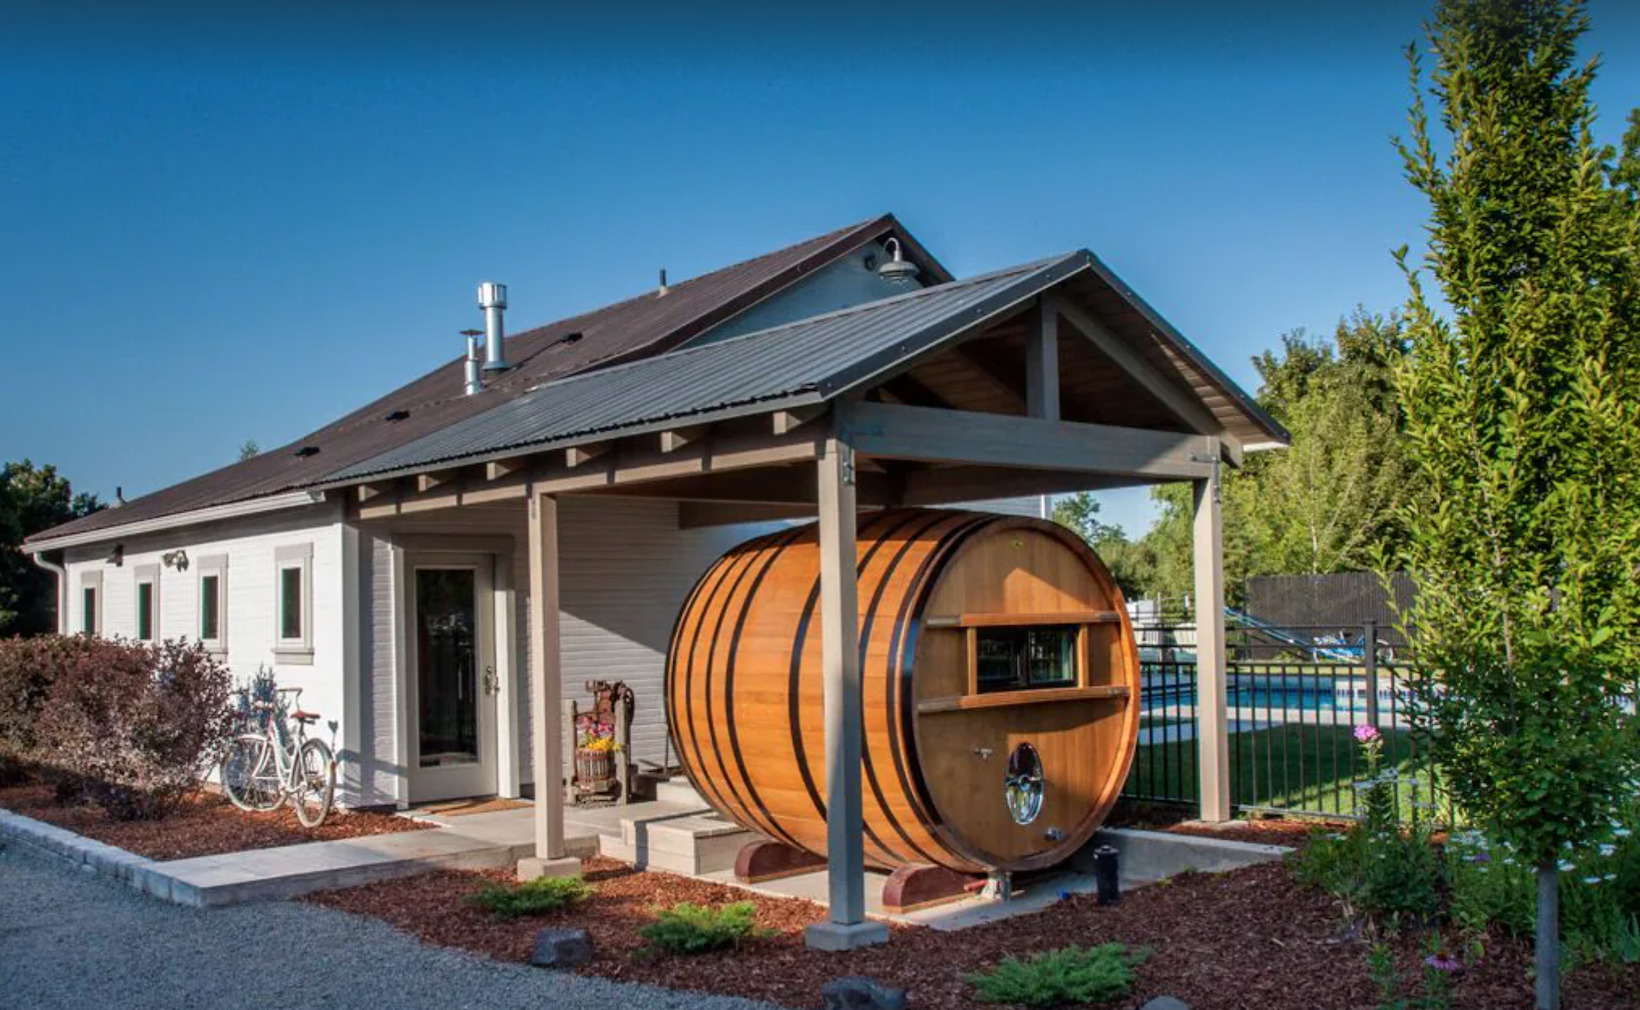 Giant wine barrel in front of house